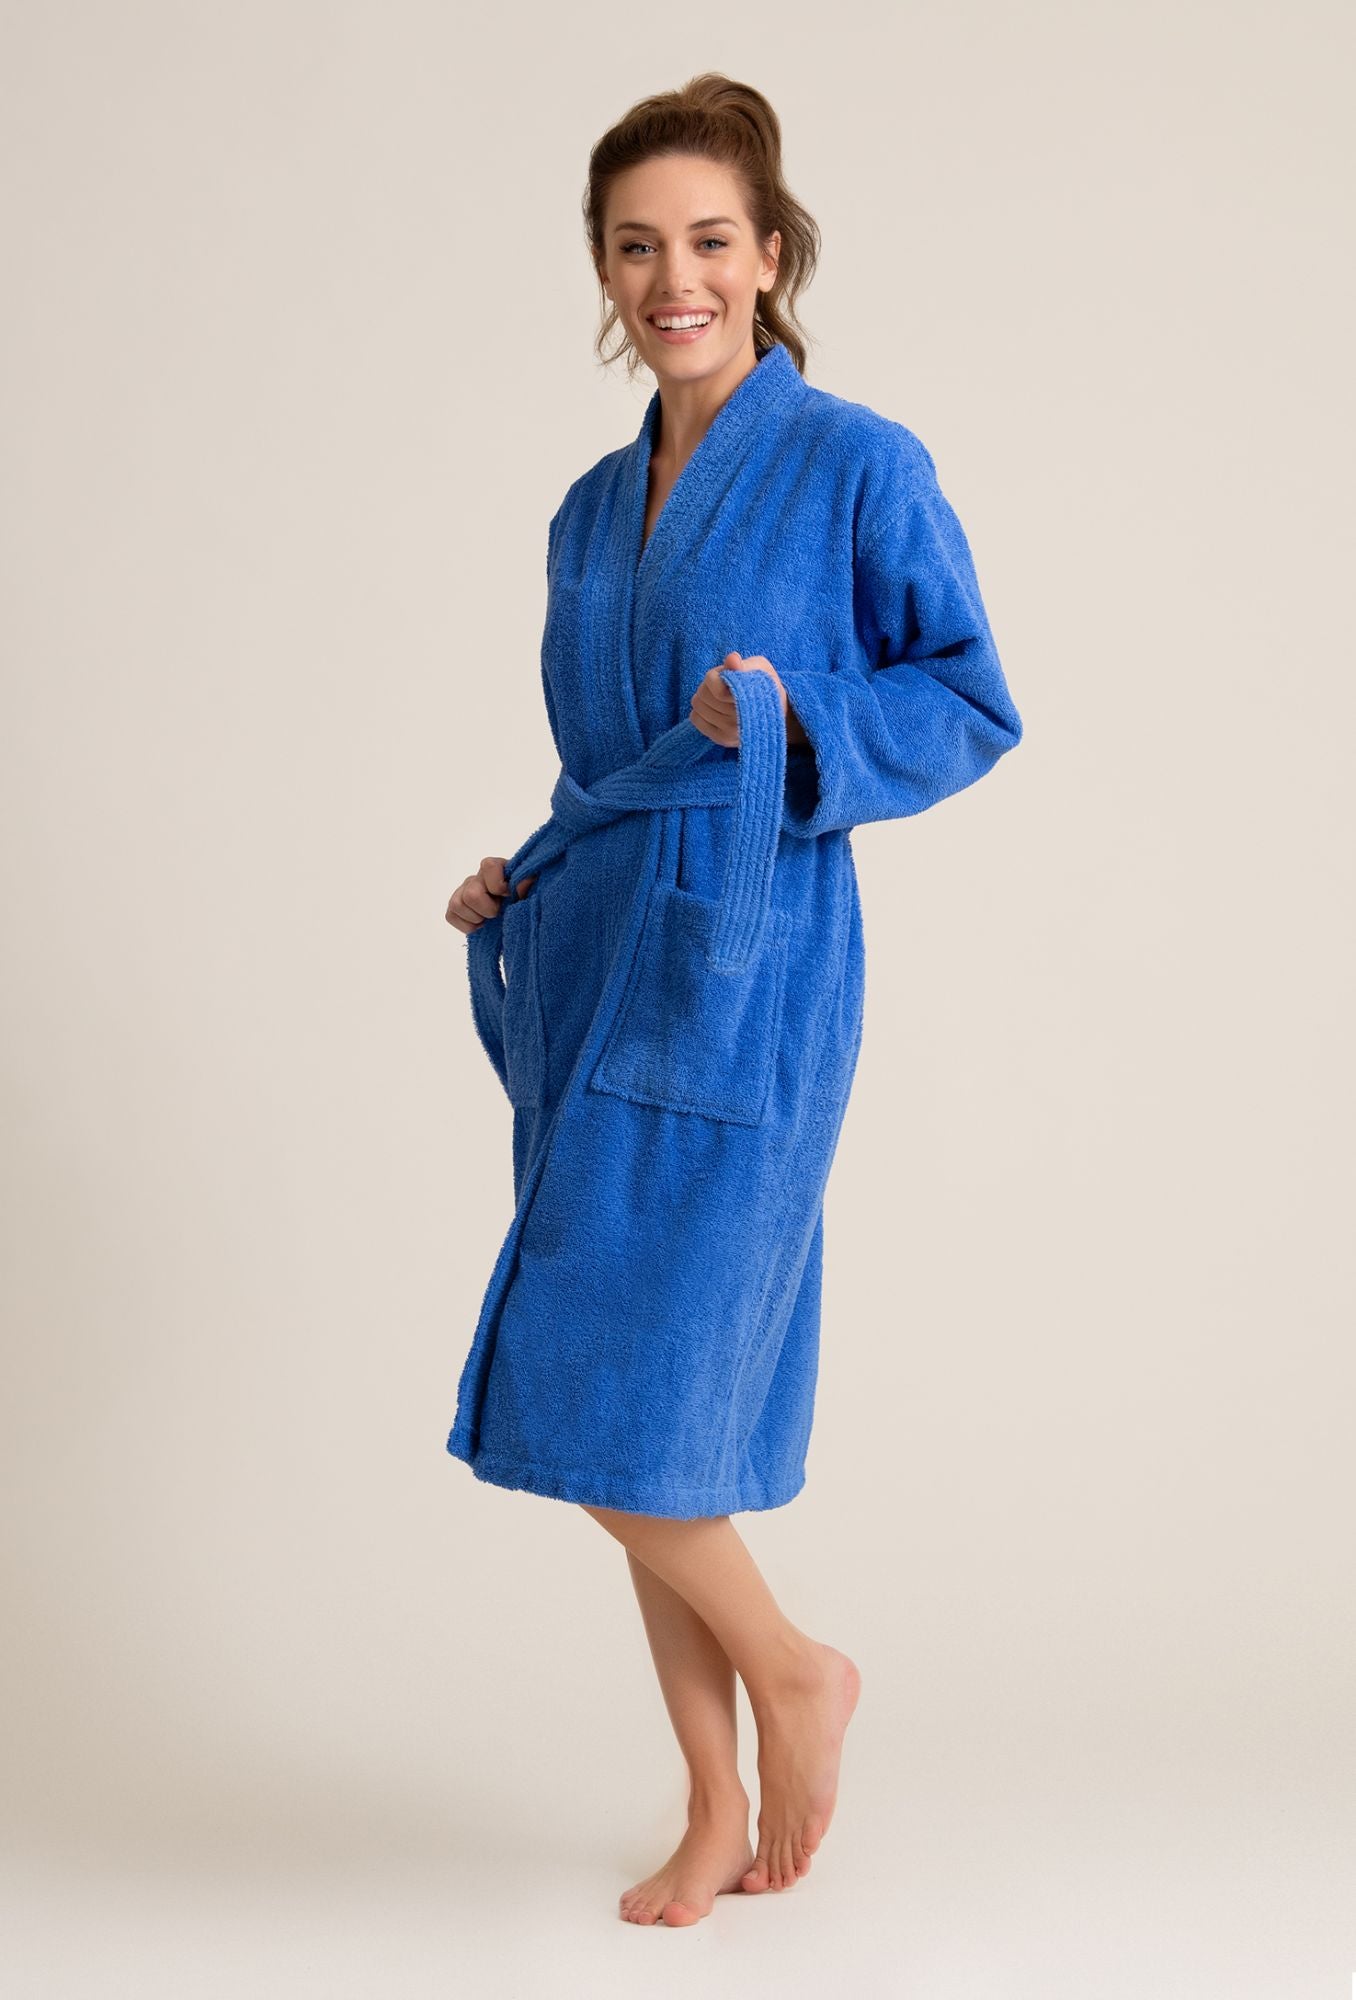 Women's Robes | Dressing Gowns | MultiscaleconsultingShops Official Site